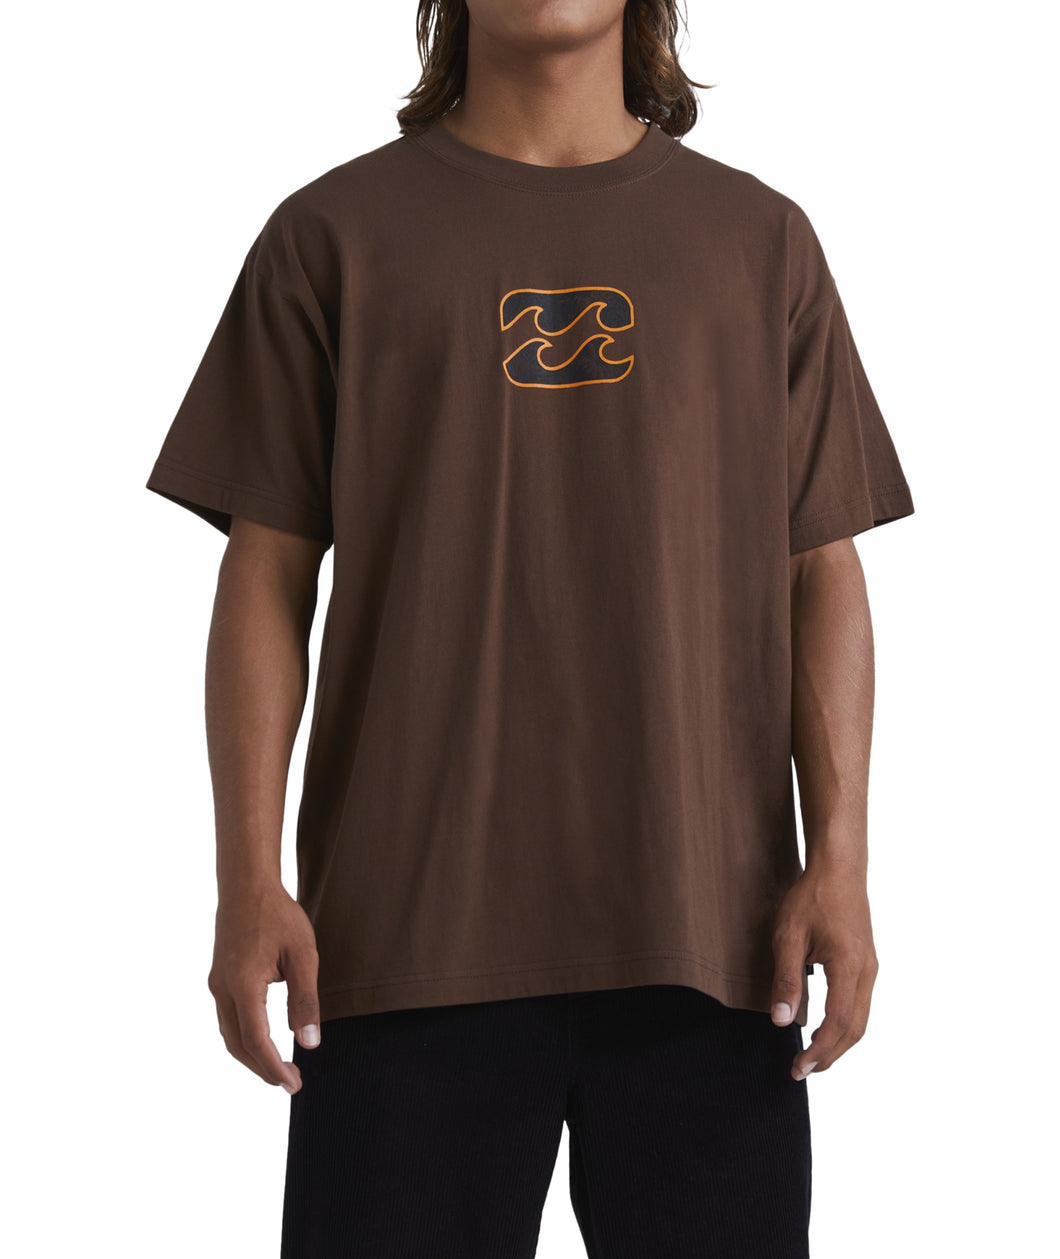 73 Waves SS - Antique Brown